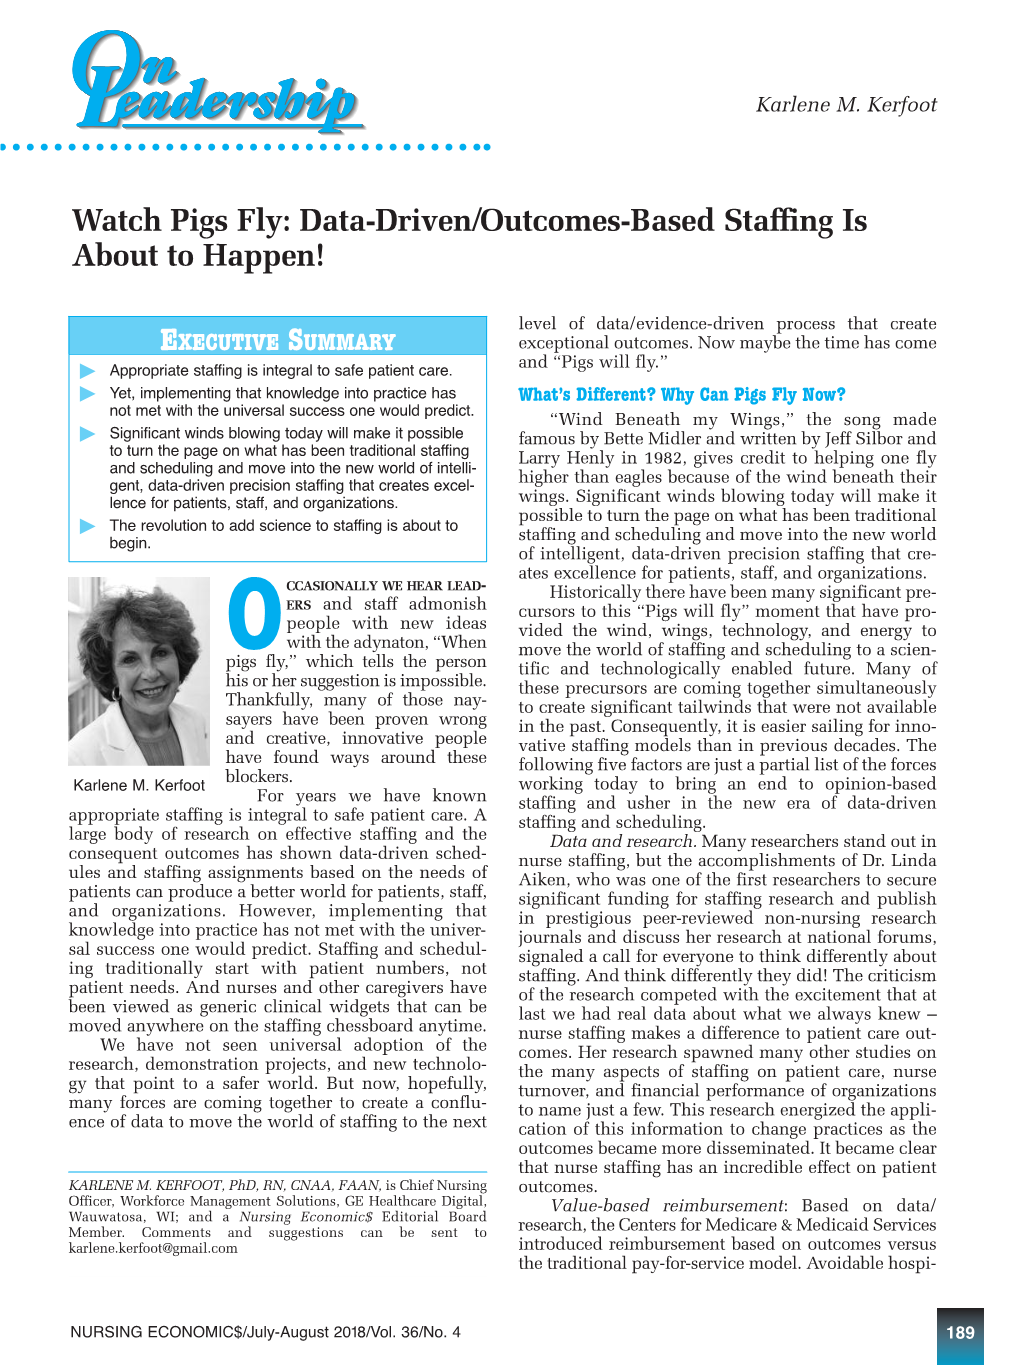 Data-Driven/Outcomes-Based Staffing Is About to Happen!